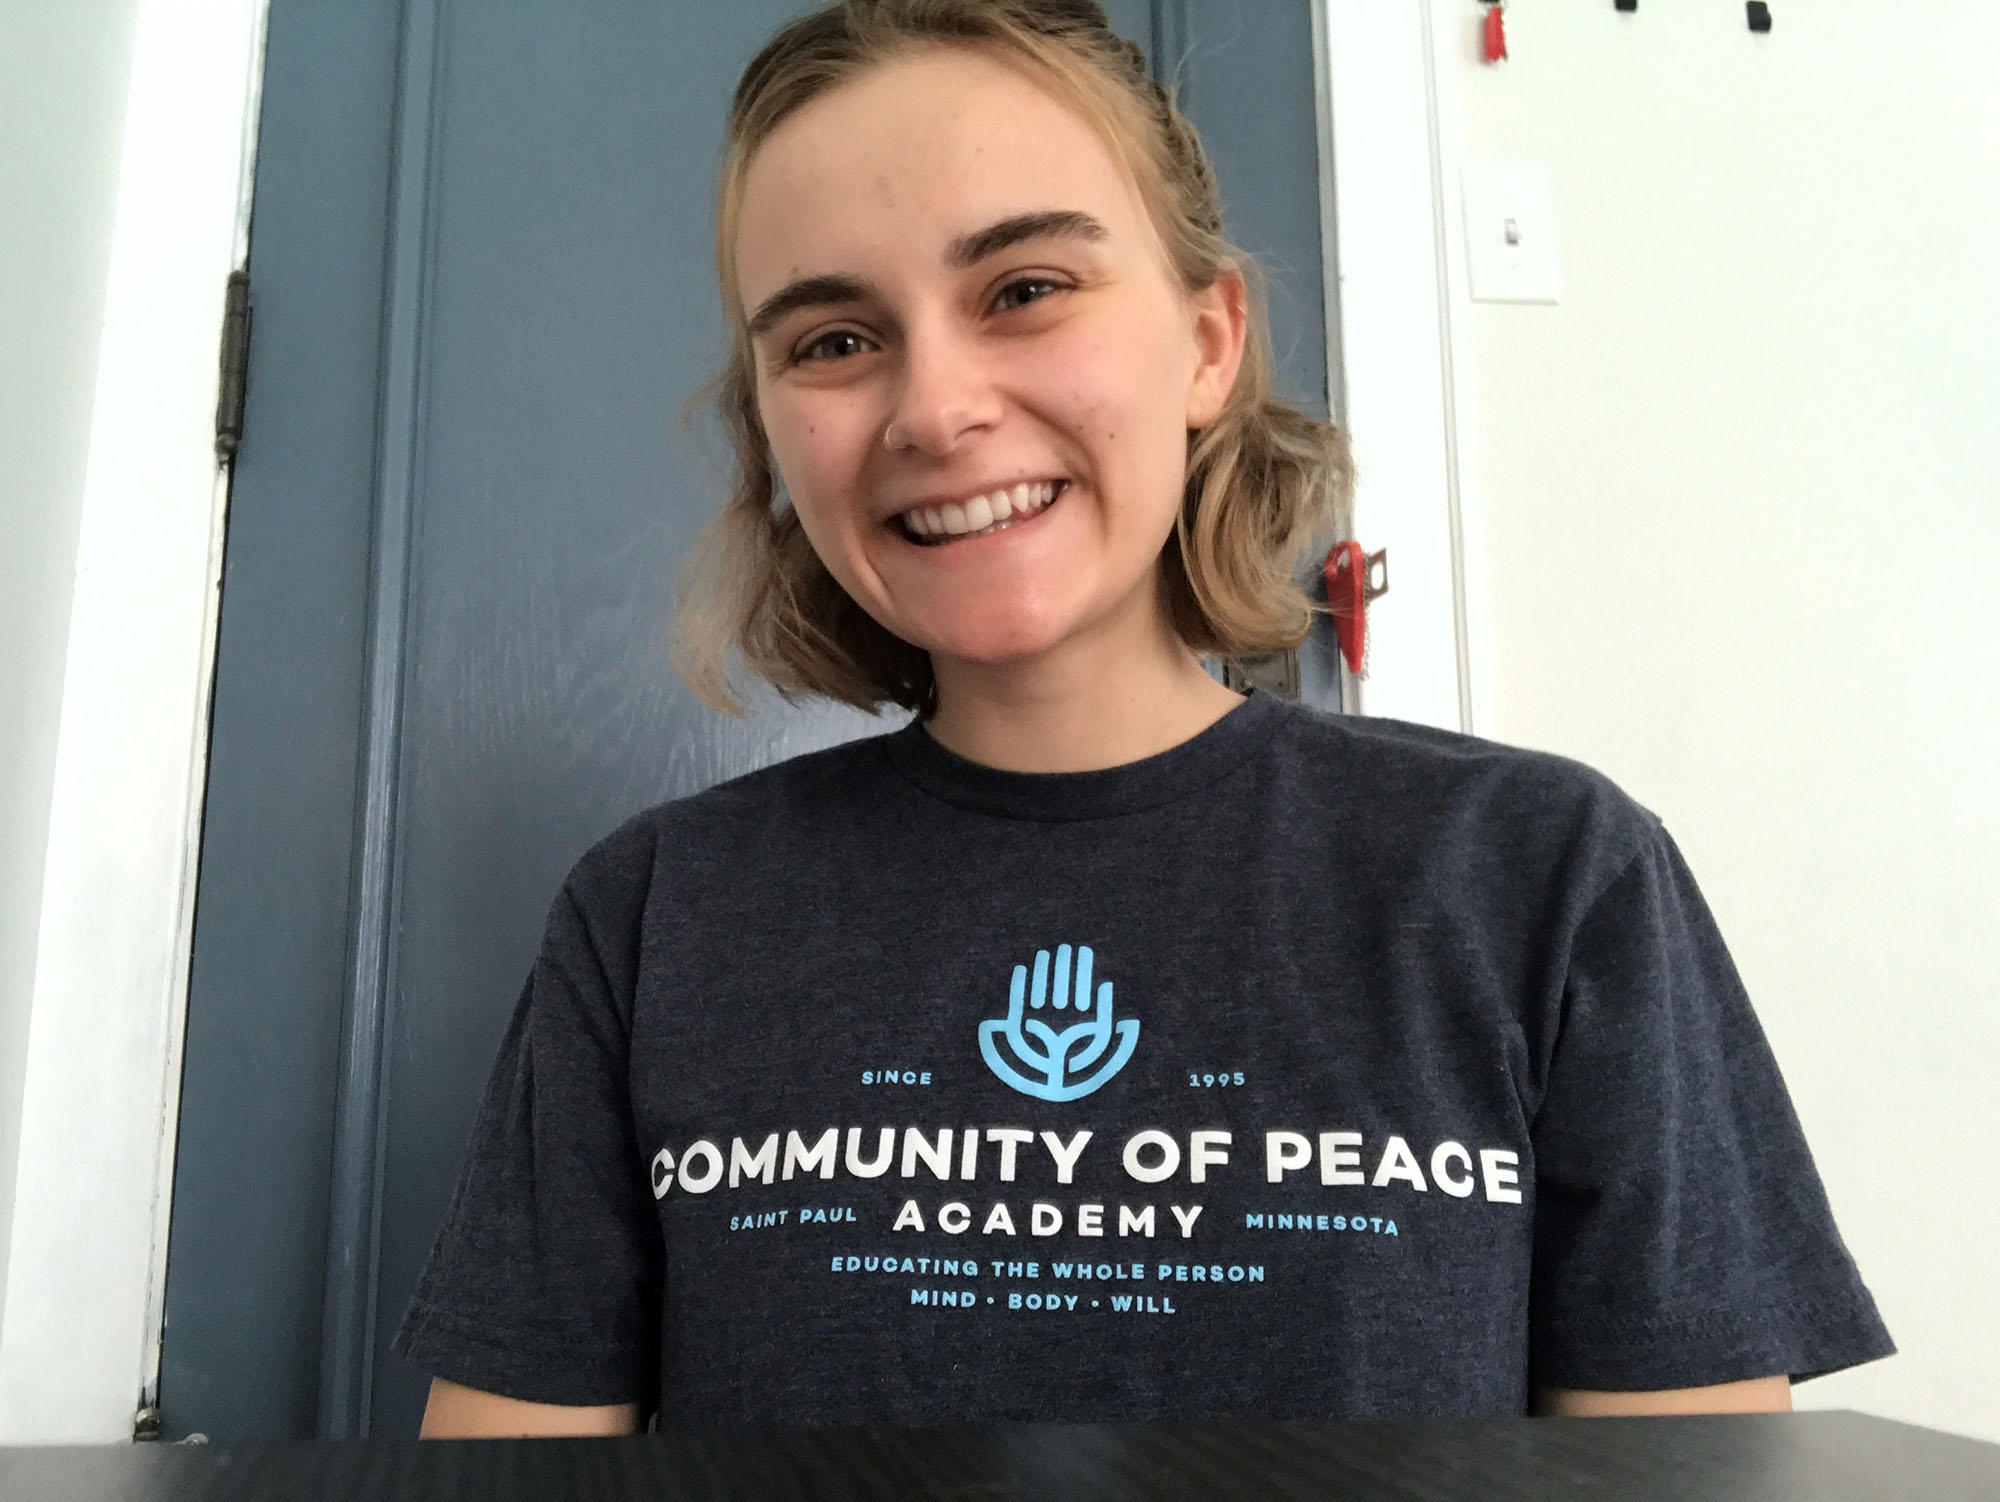 A woman wearing a gray t-shirt that says Community of Peace Academy